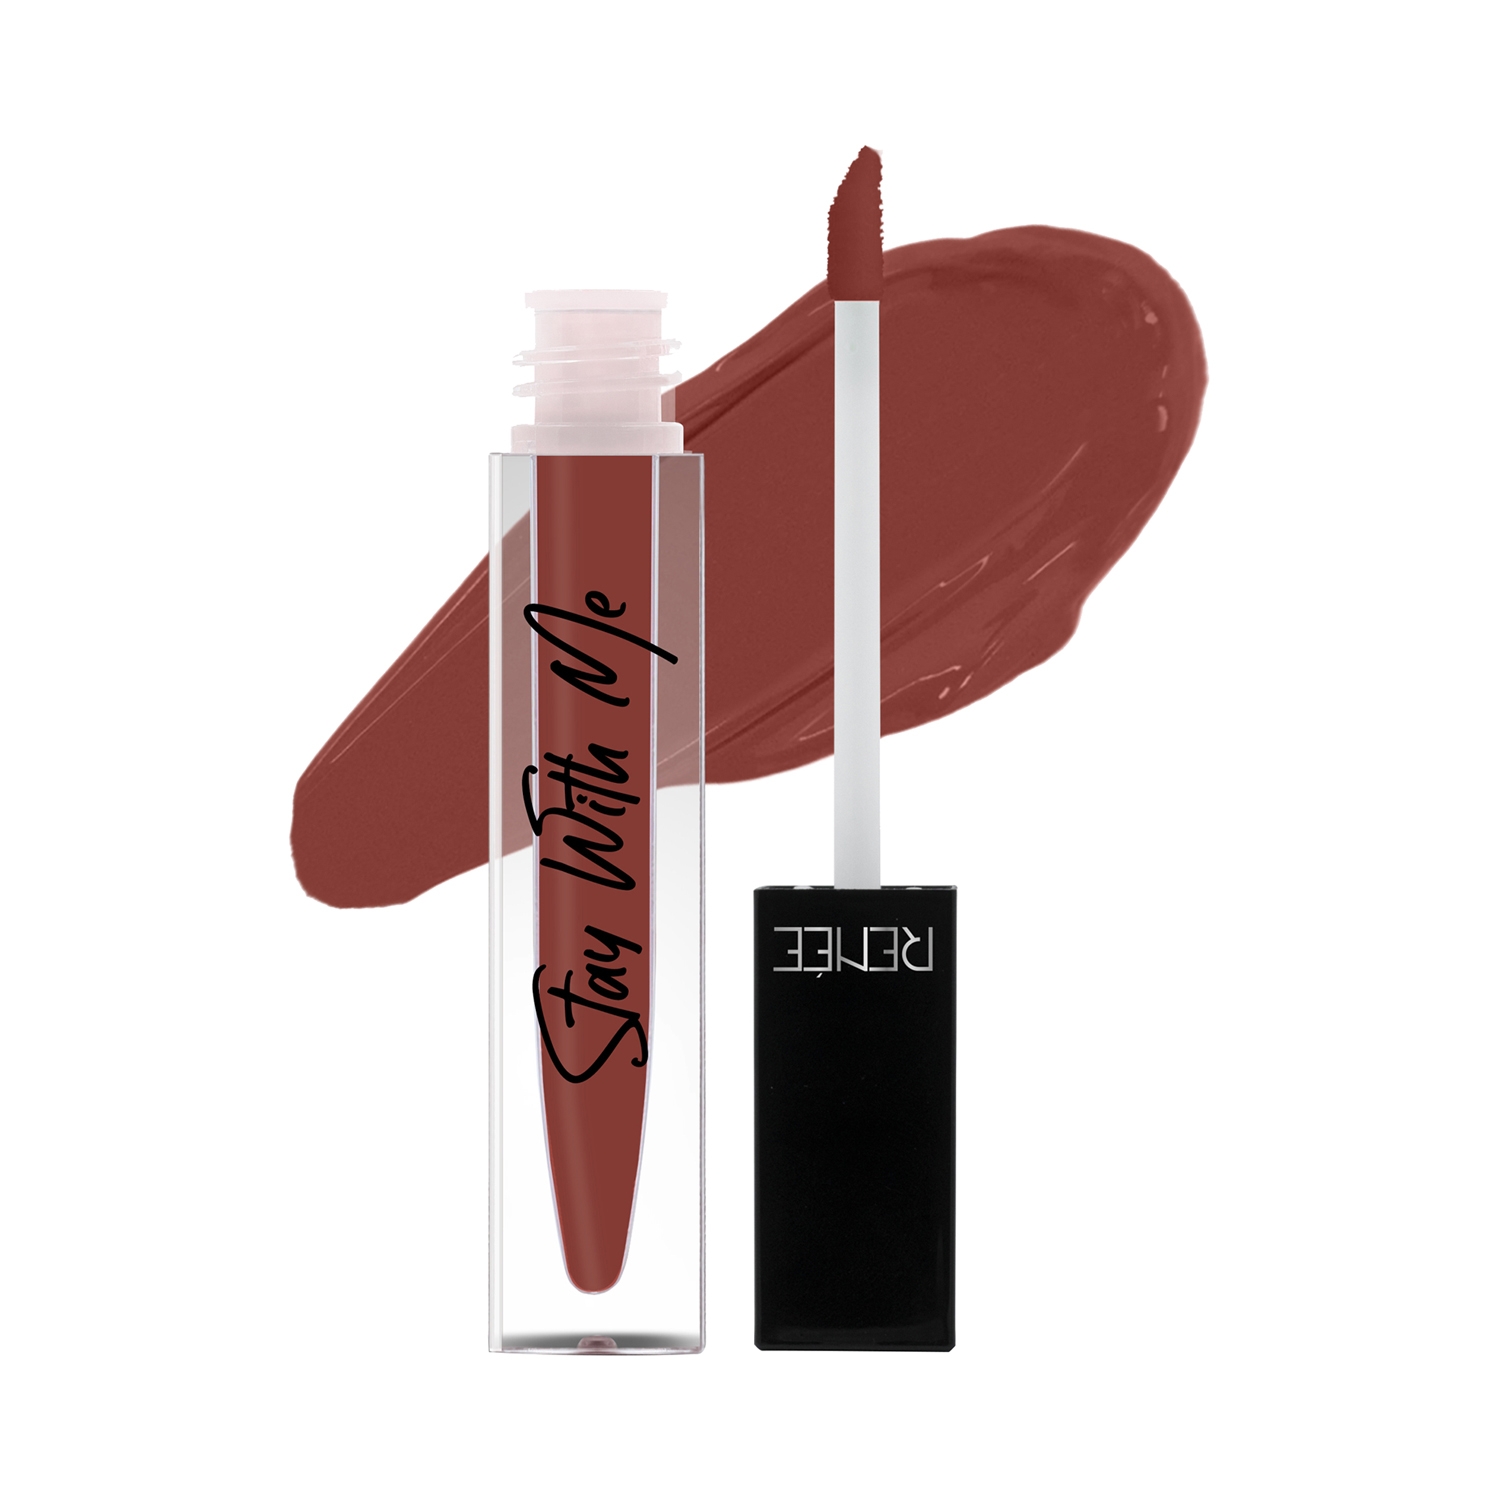 RENEE | RENEE Stay With Me Non Transfer Matte Liquid Lip Color - Play Of Clay (5ml)